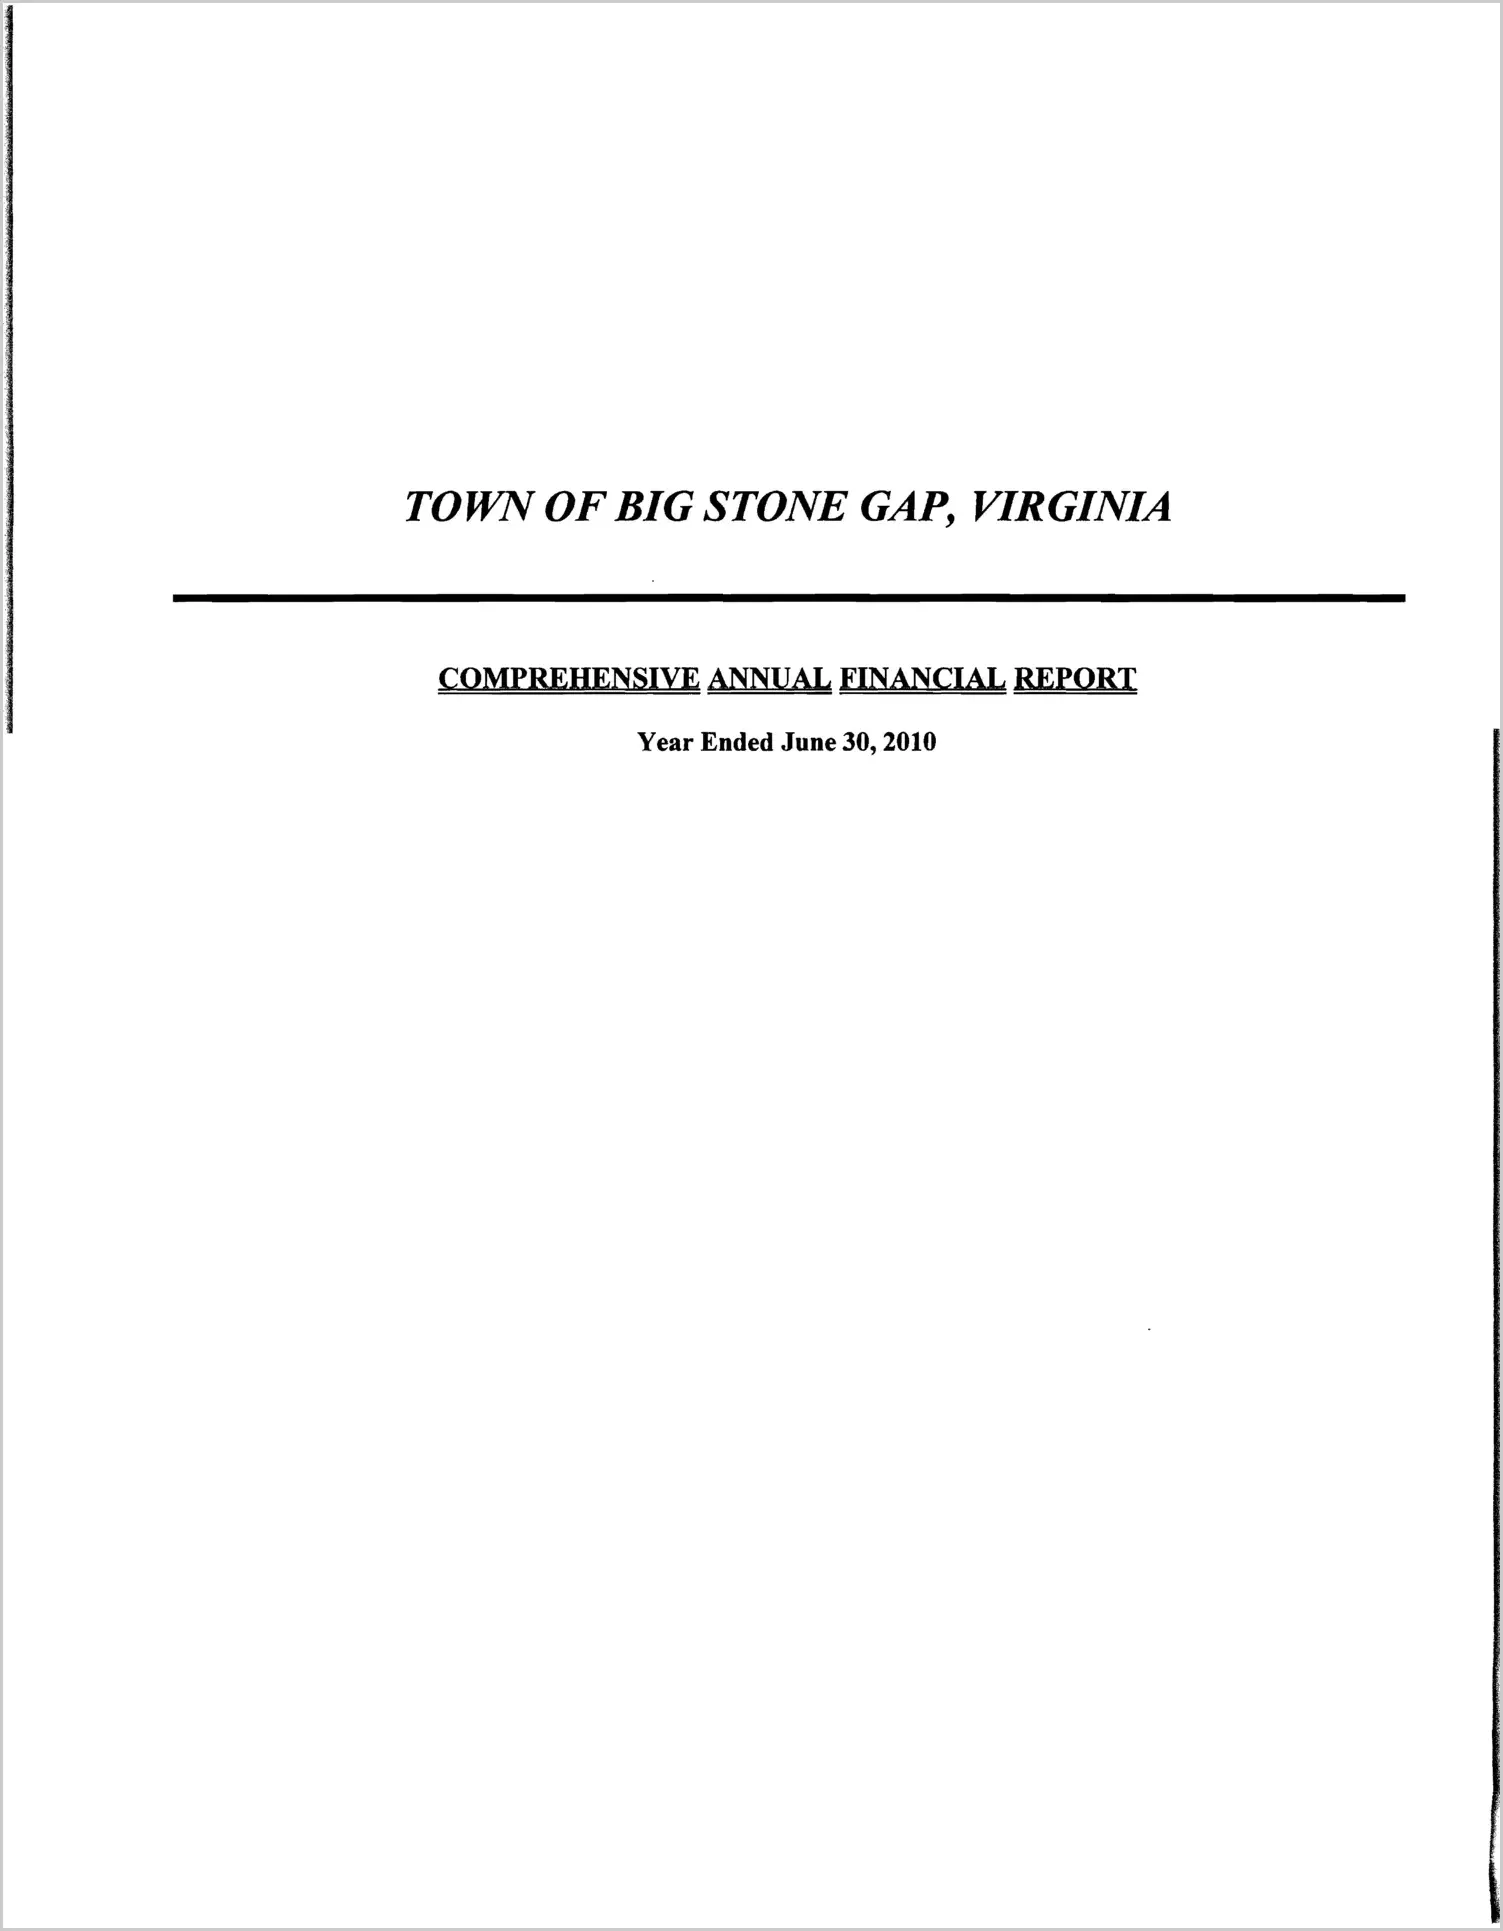 2010 Annual Financial Report for Town of Big Stone Gap